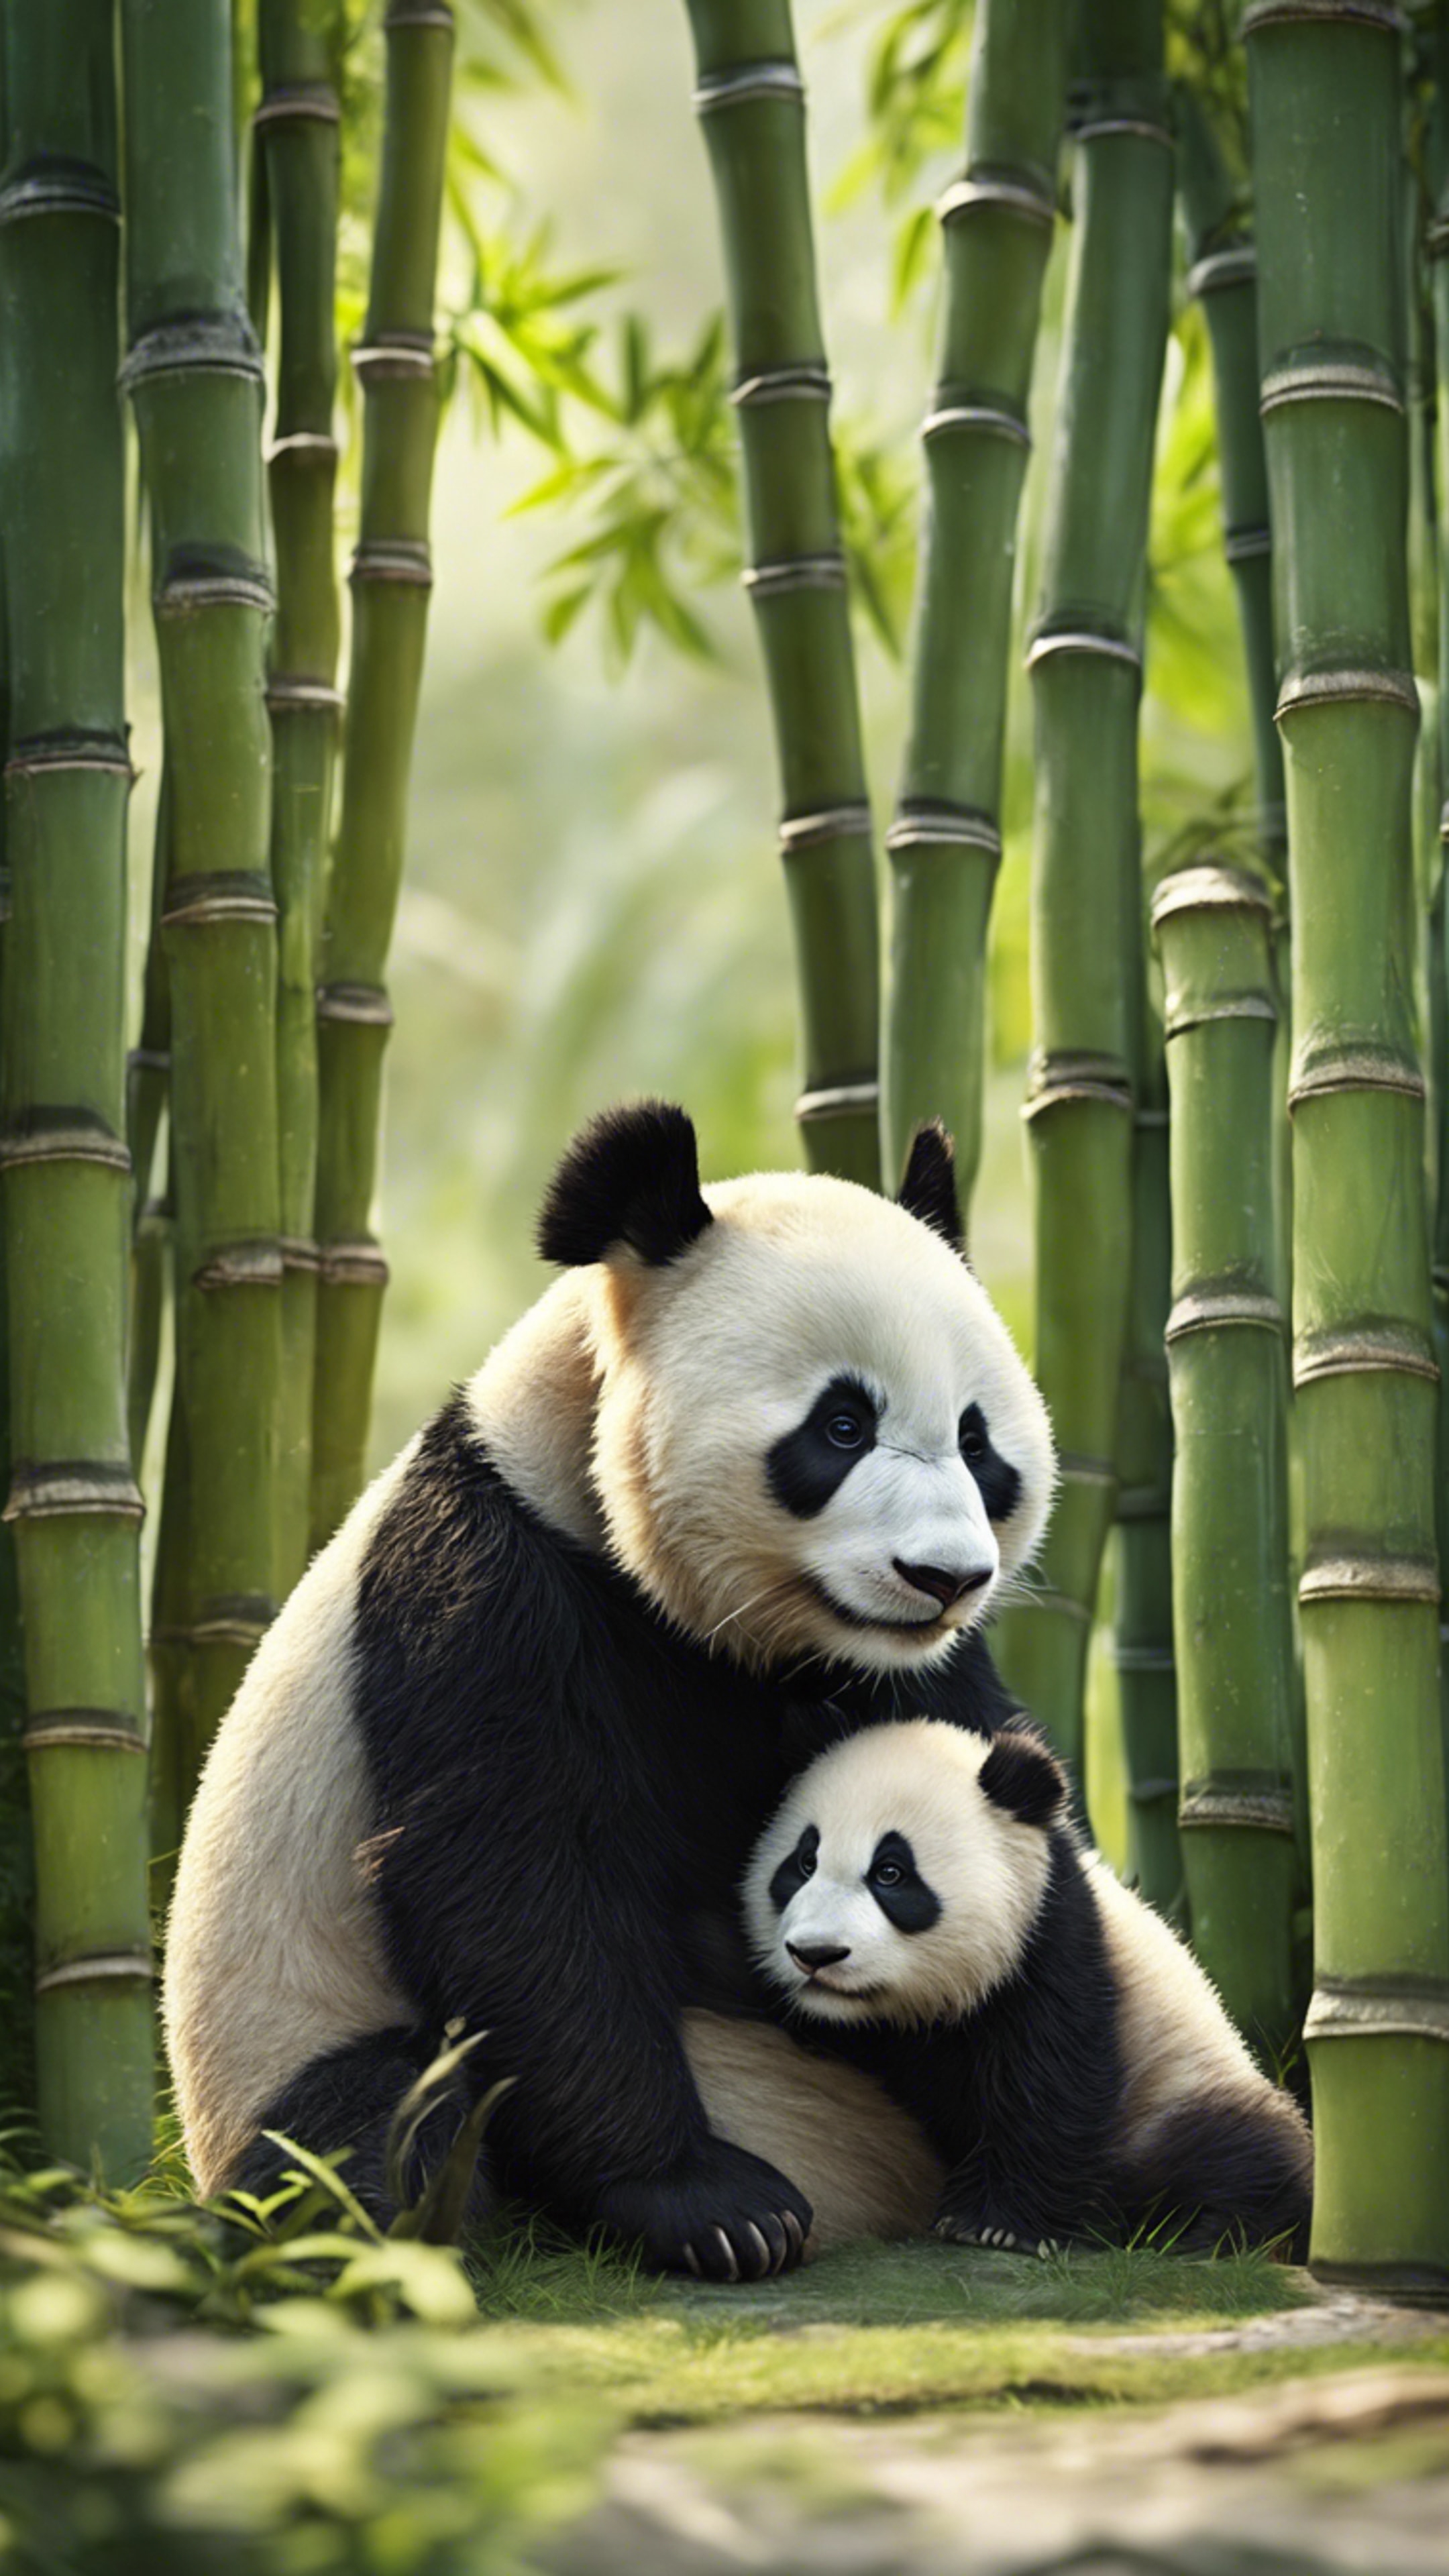 A mother panda teaching her cub to climb a bamboo tree in a tranquil jungle setting. 牆紙[bf956daca53d4d23a107]